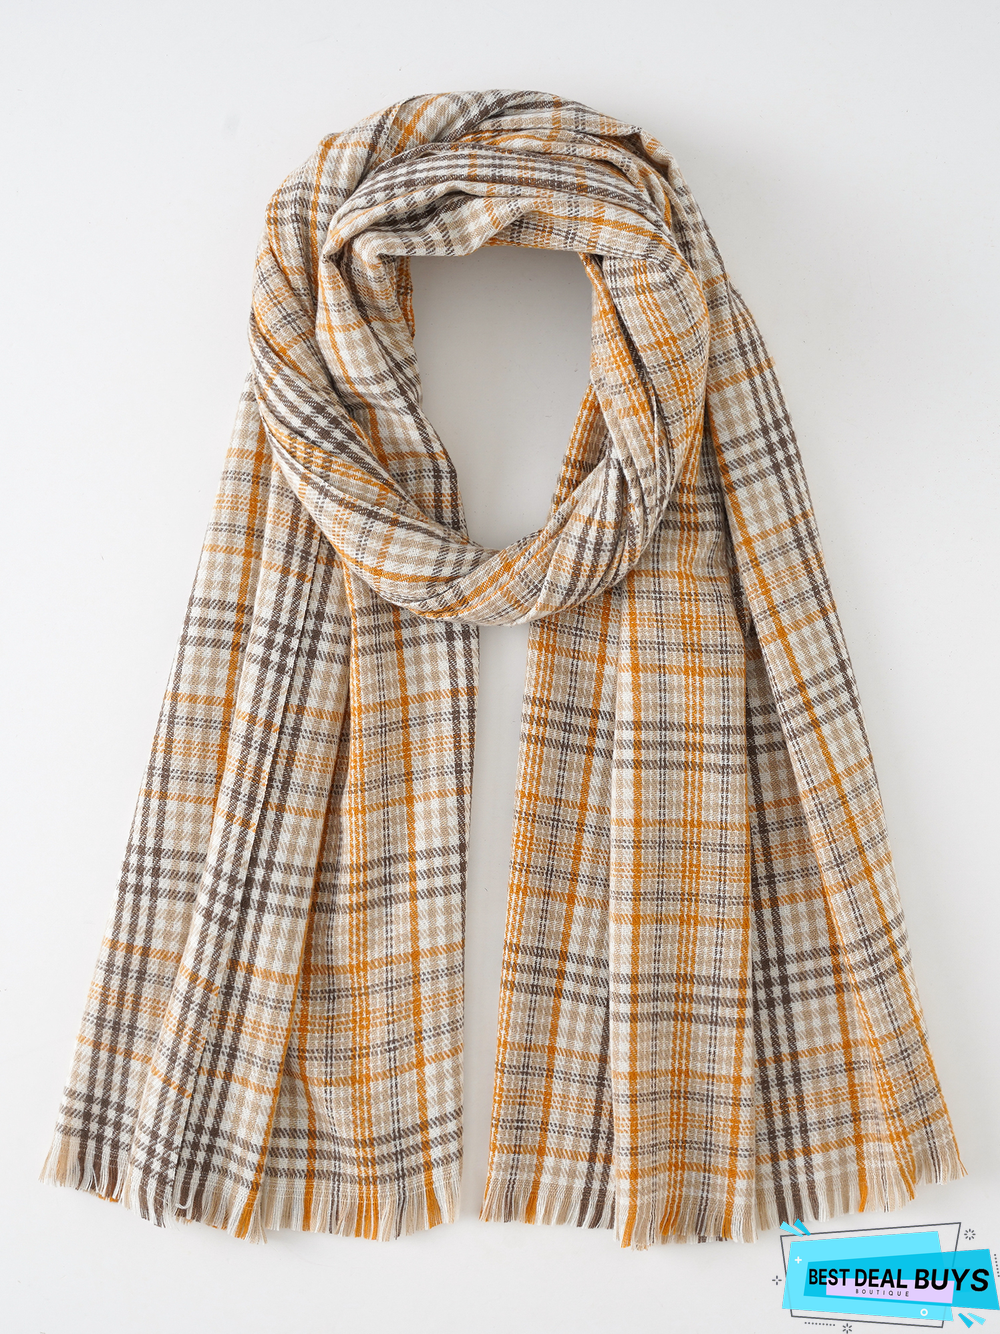 Casual Two-color Striped Plaid Scarf Daily Commuting Coat Sweater Matching Accessories